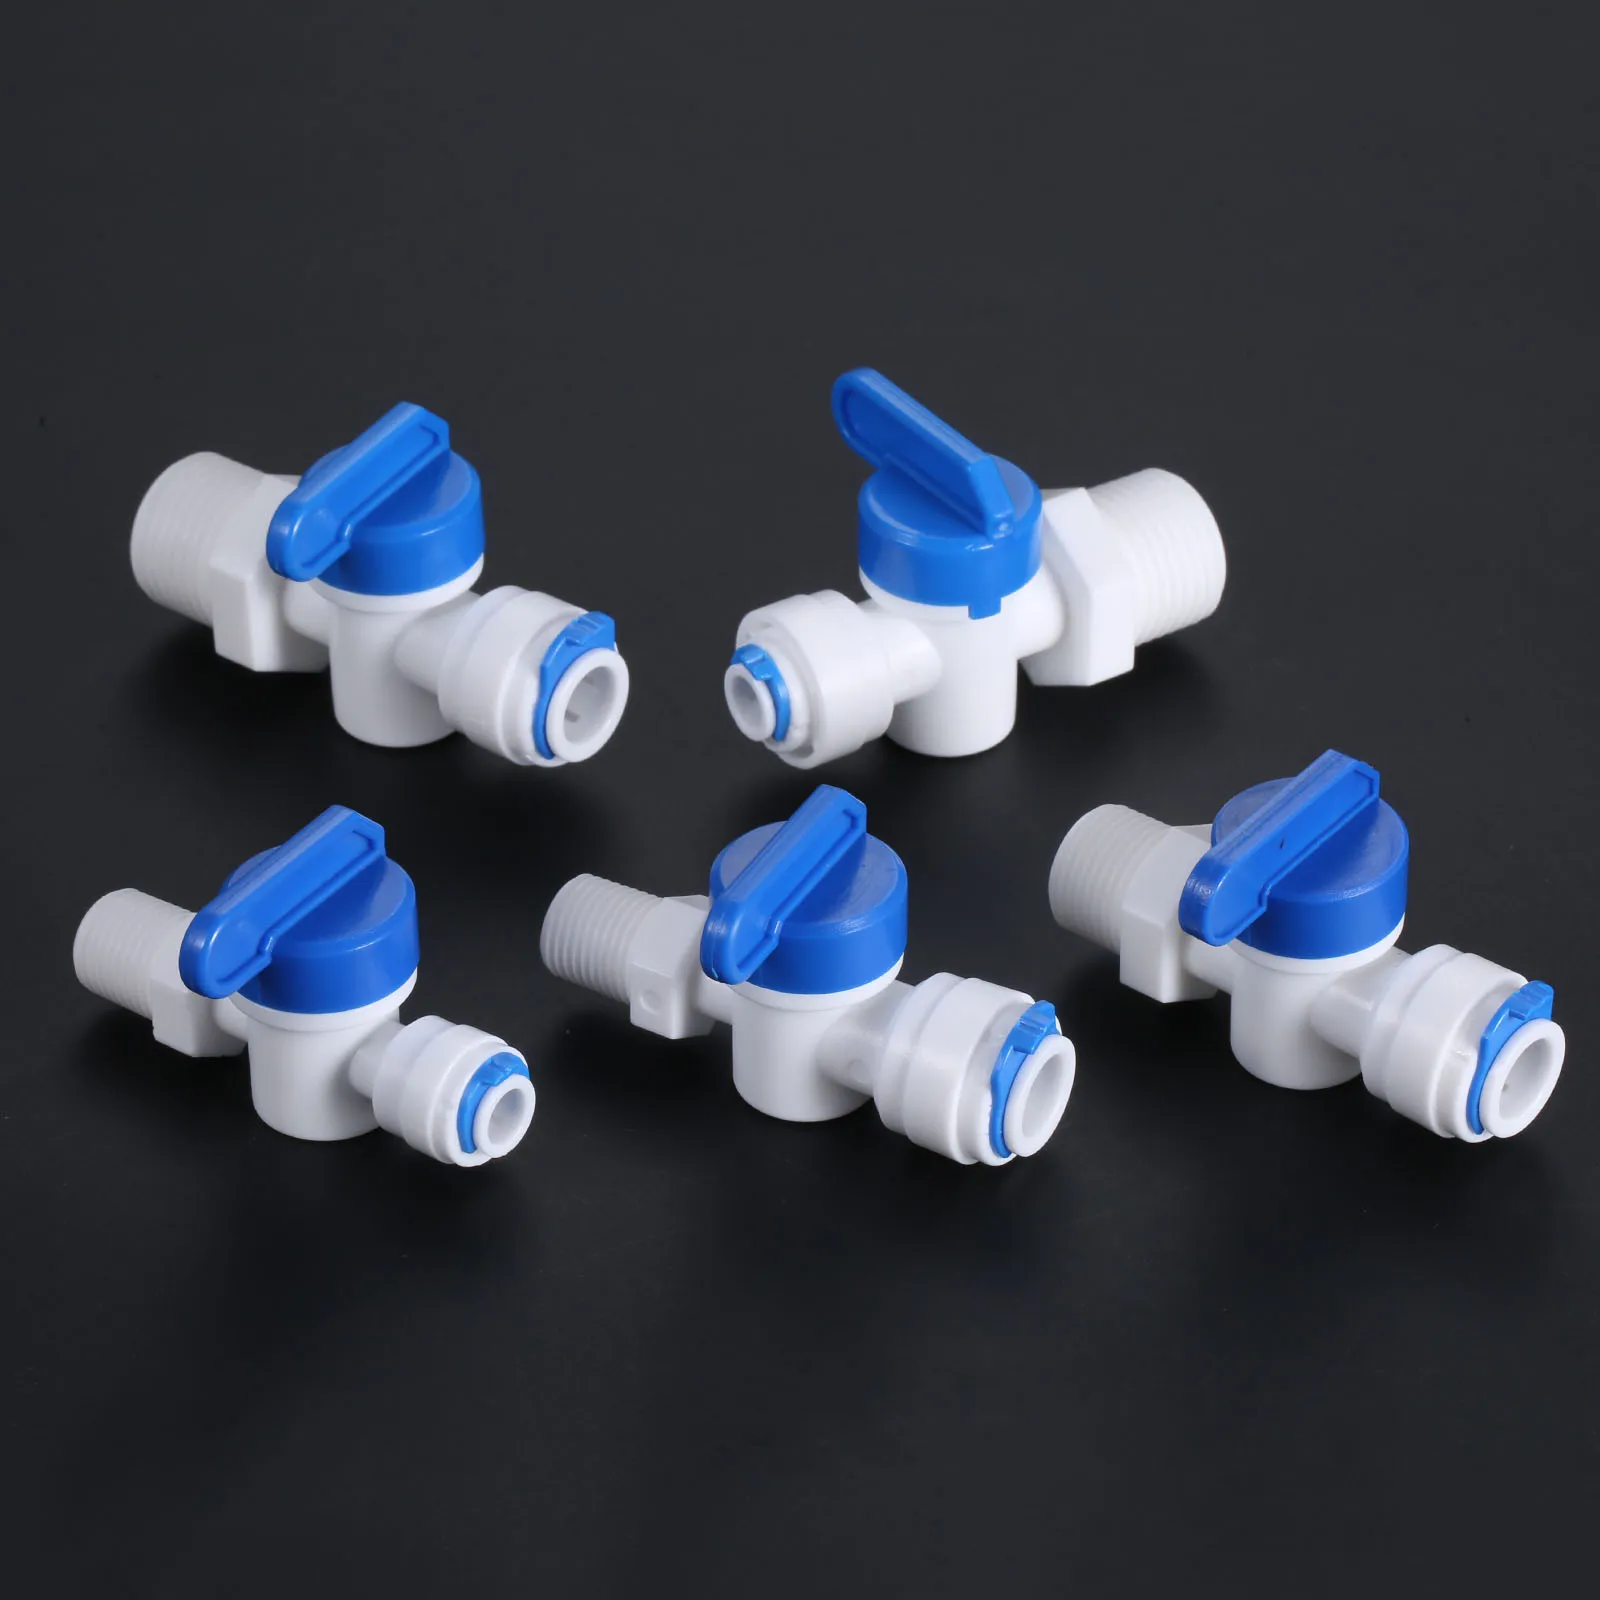 

2Pcs RO Water Straight Ball Valve Reveser Osmosis Fitting1/4" 3/8" OD Hose 1/4"3/8" 1/2" BSP Male Thread Quick Connect Fittings